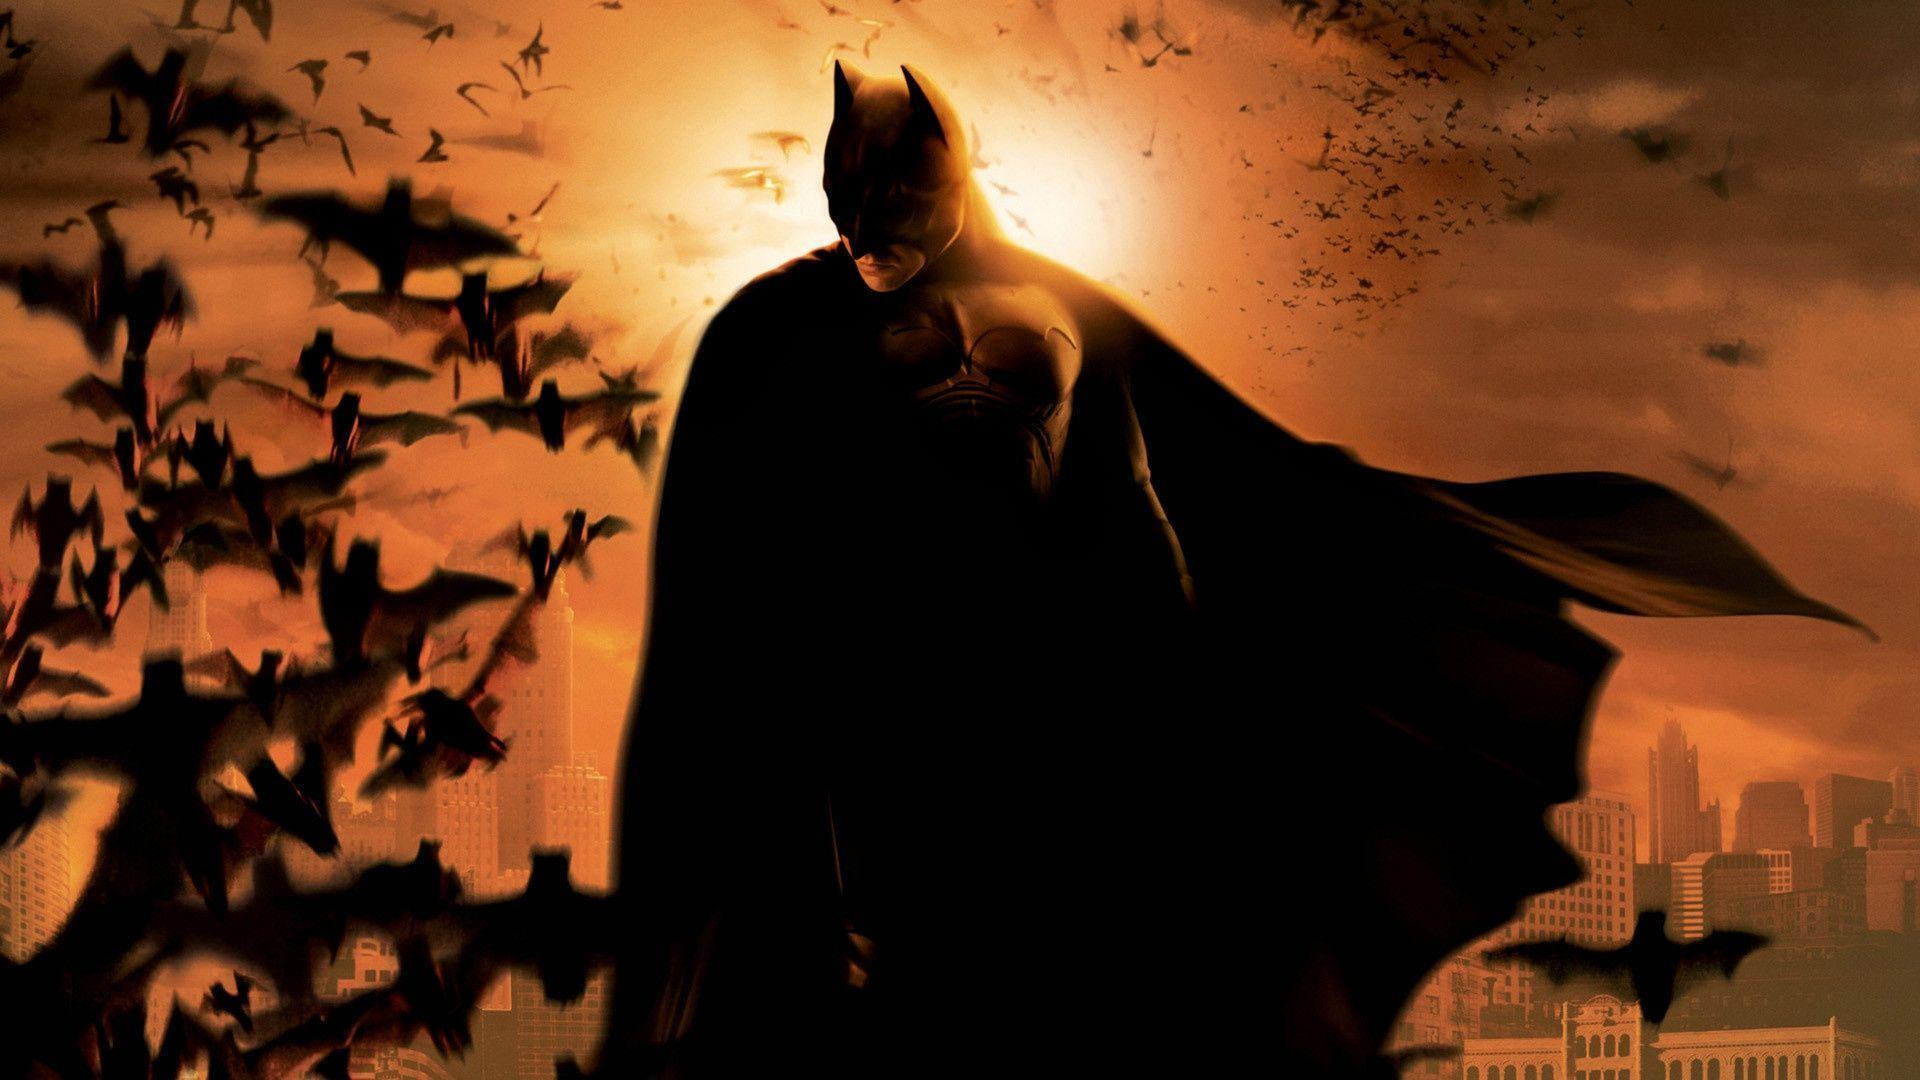 Wallpapers For > The Dark Knight Rises Wallpapers Hd 1920x1080